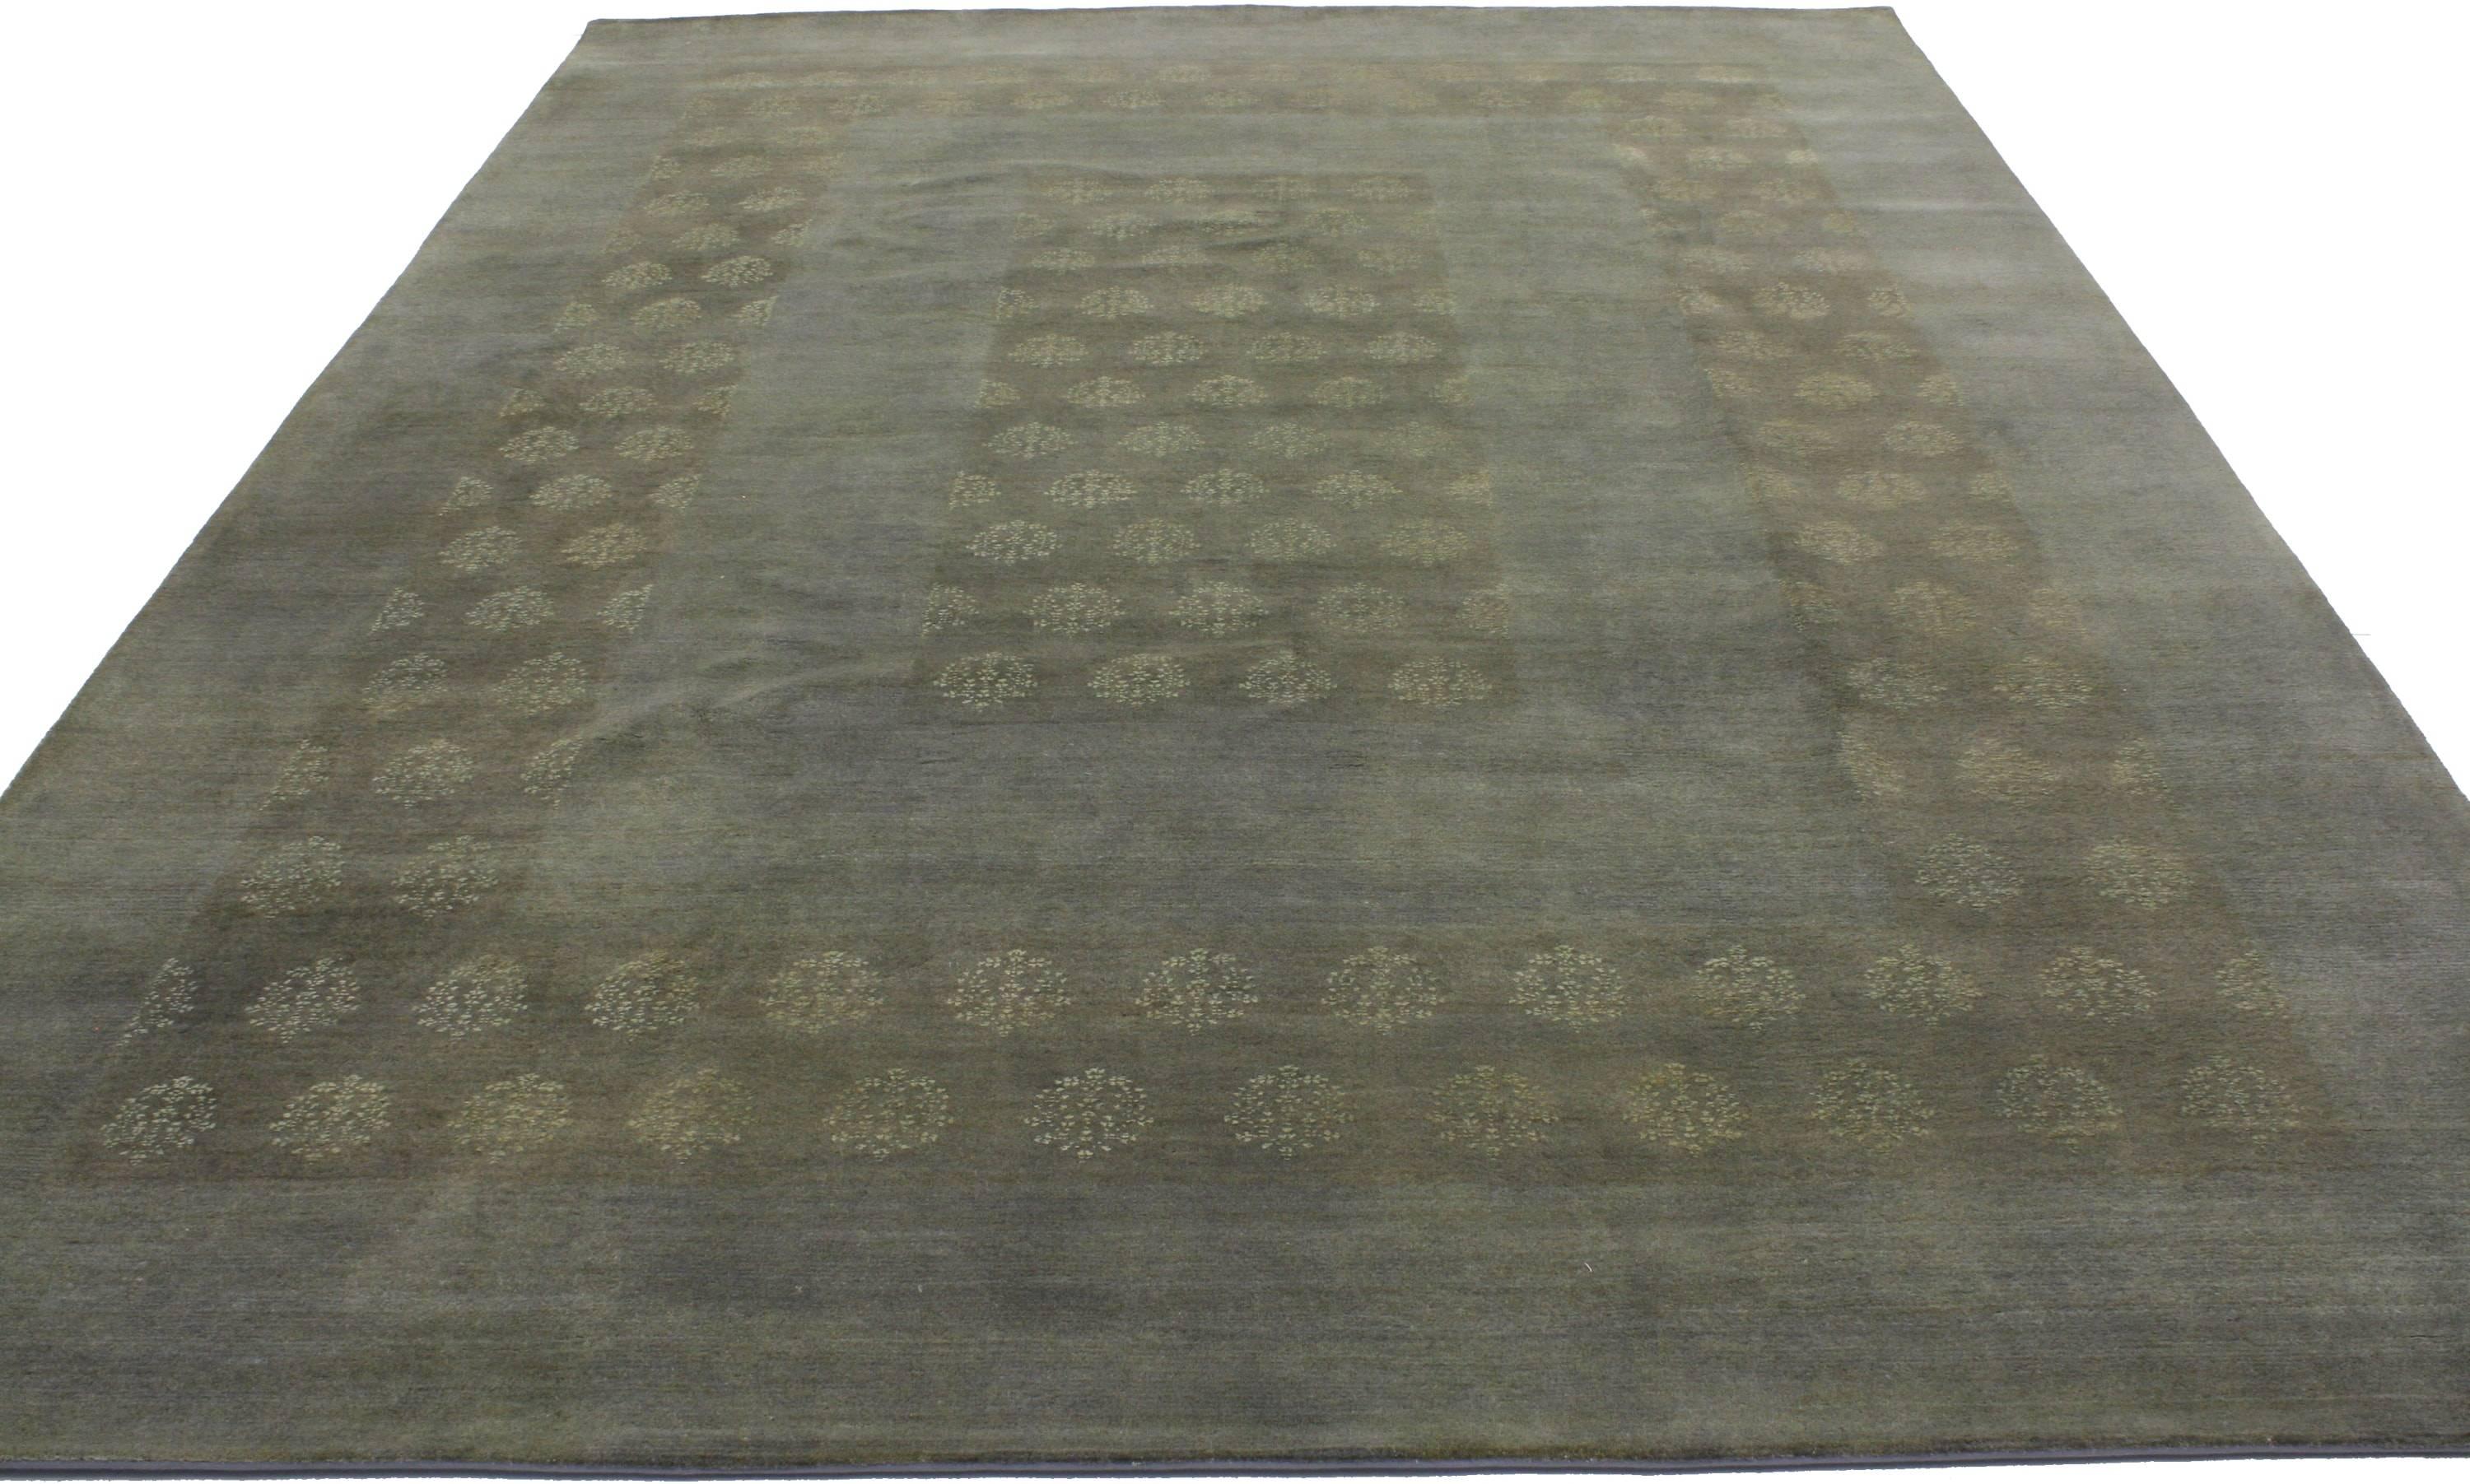 30217, new Indian rug with modern transitional style. Delicate floral bouquets recalling the sweetly arranged patterns of a Kashmir shawl cover the square design of this transitional style Indian rug. The chic geometric borders with charming organic